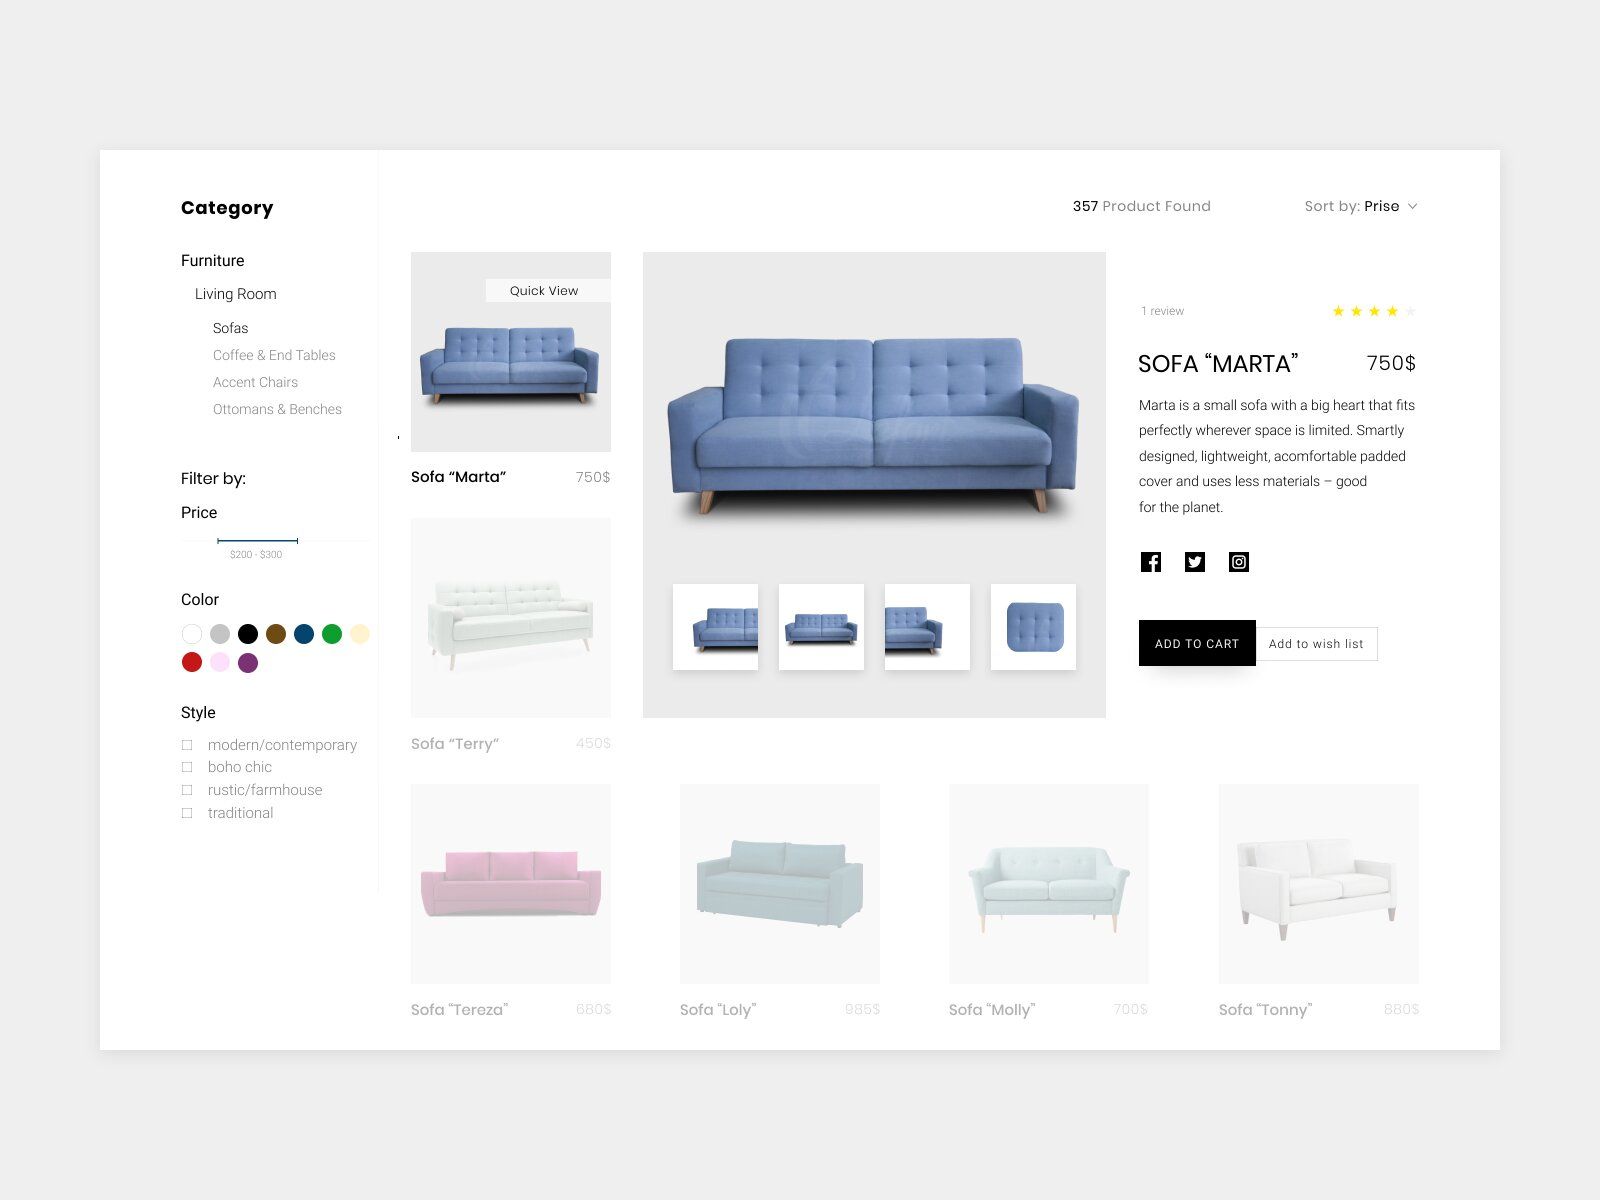 Online store with filters and responsive design (*image by [Anastasia Petrenko](https://dribbble.com/AnnastasiiaP2018){ rel="nofollow" target="_blank" .default-md}*)